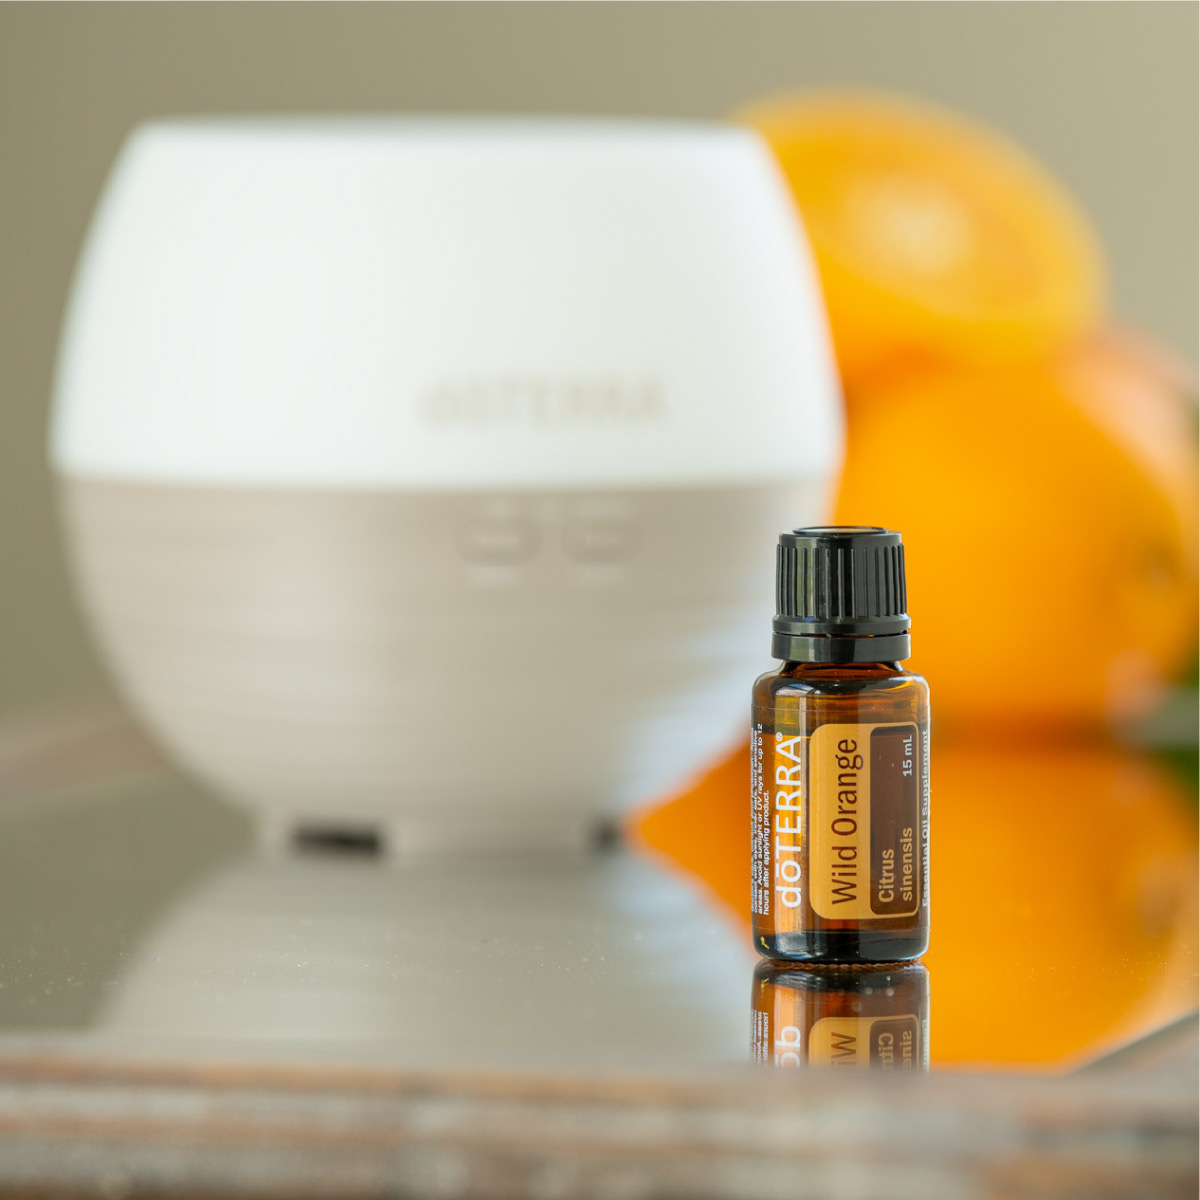 Two bottles of Wild Orange oil surrounded by orange peels on a wooden surface. Is Wild Orange essential oil good for skin? Many people use Wild Orange oil for skin due to its cleansing properties.